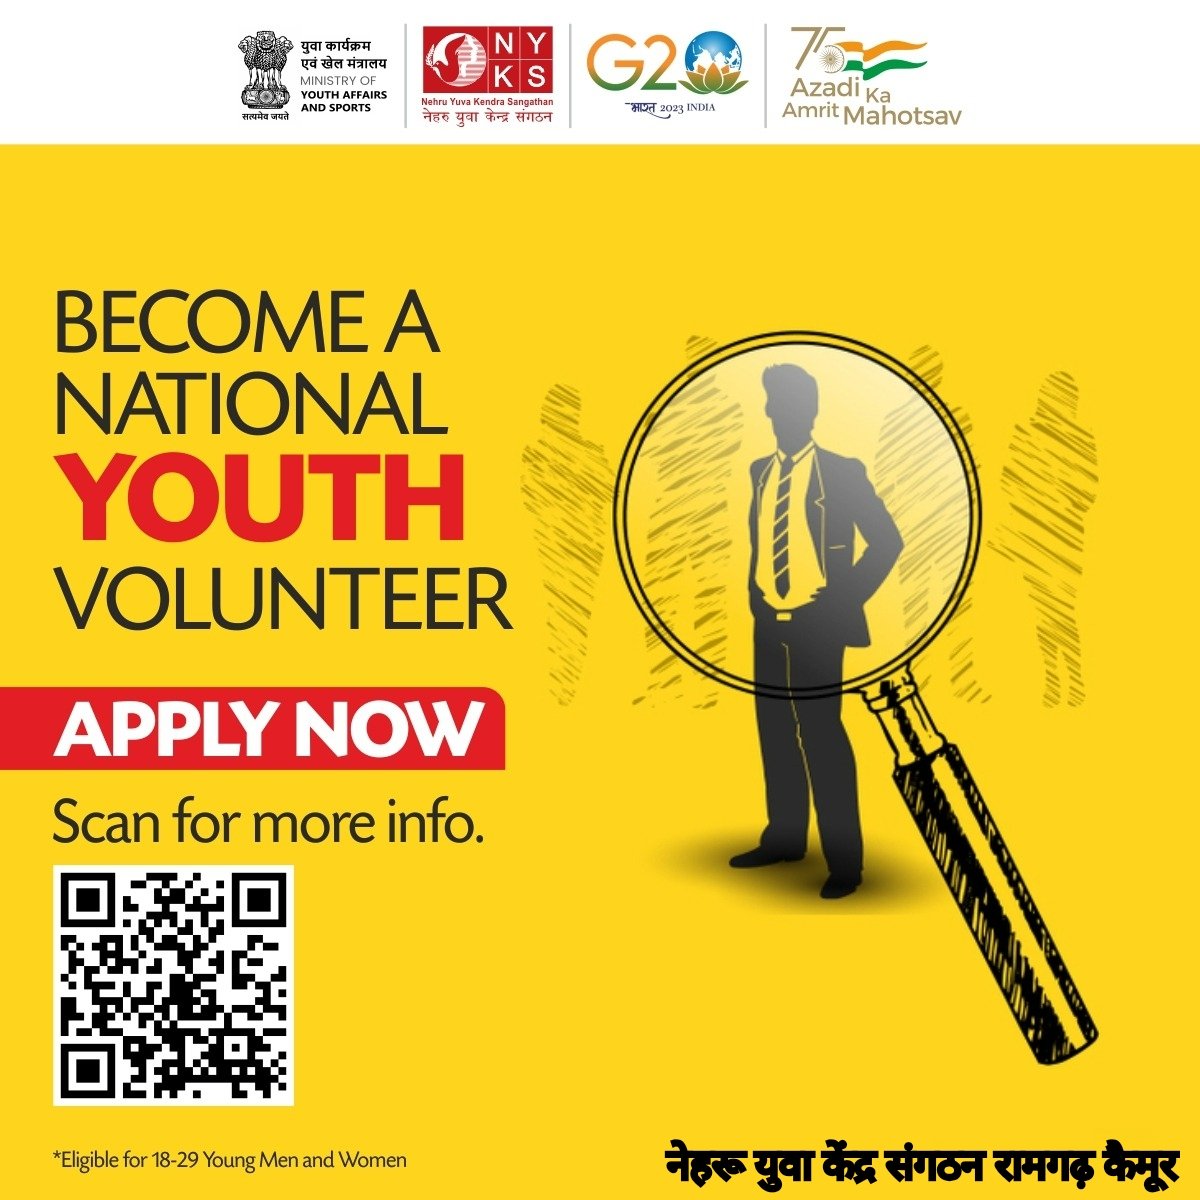 Become a National Youth Volunteer.
Eligible for 18-29 Young Men and Women. 
For more information connect with your nearest NYK district offices. 
or Scan the QR code.
Visit: nyks.nic.in

#NYV #youthvolunteer #NyksIndia #youth #India #registrationopen